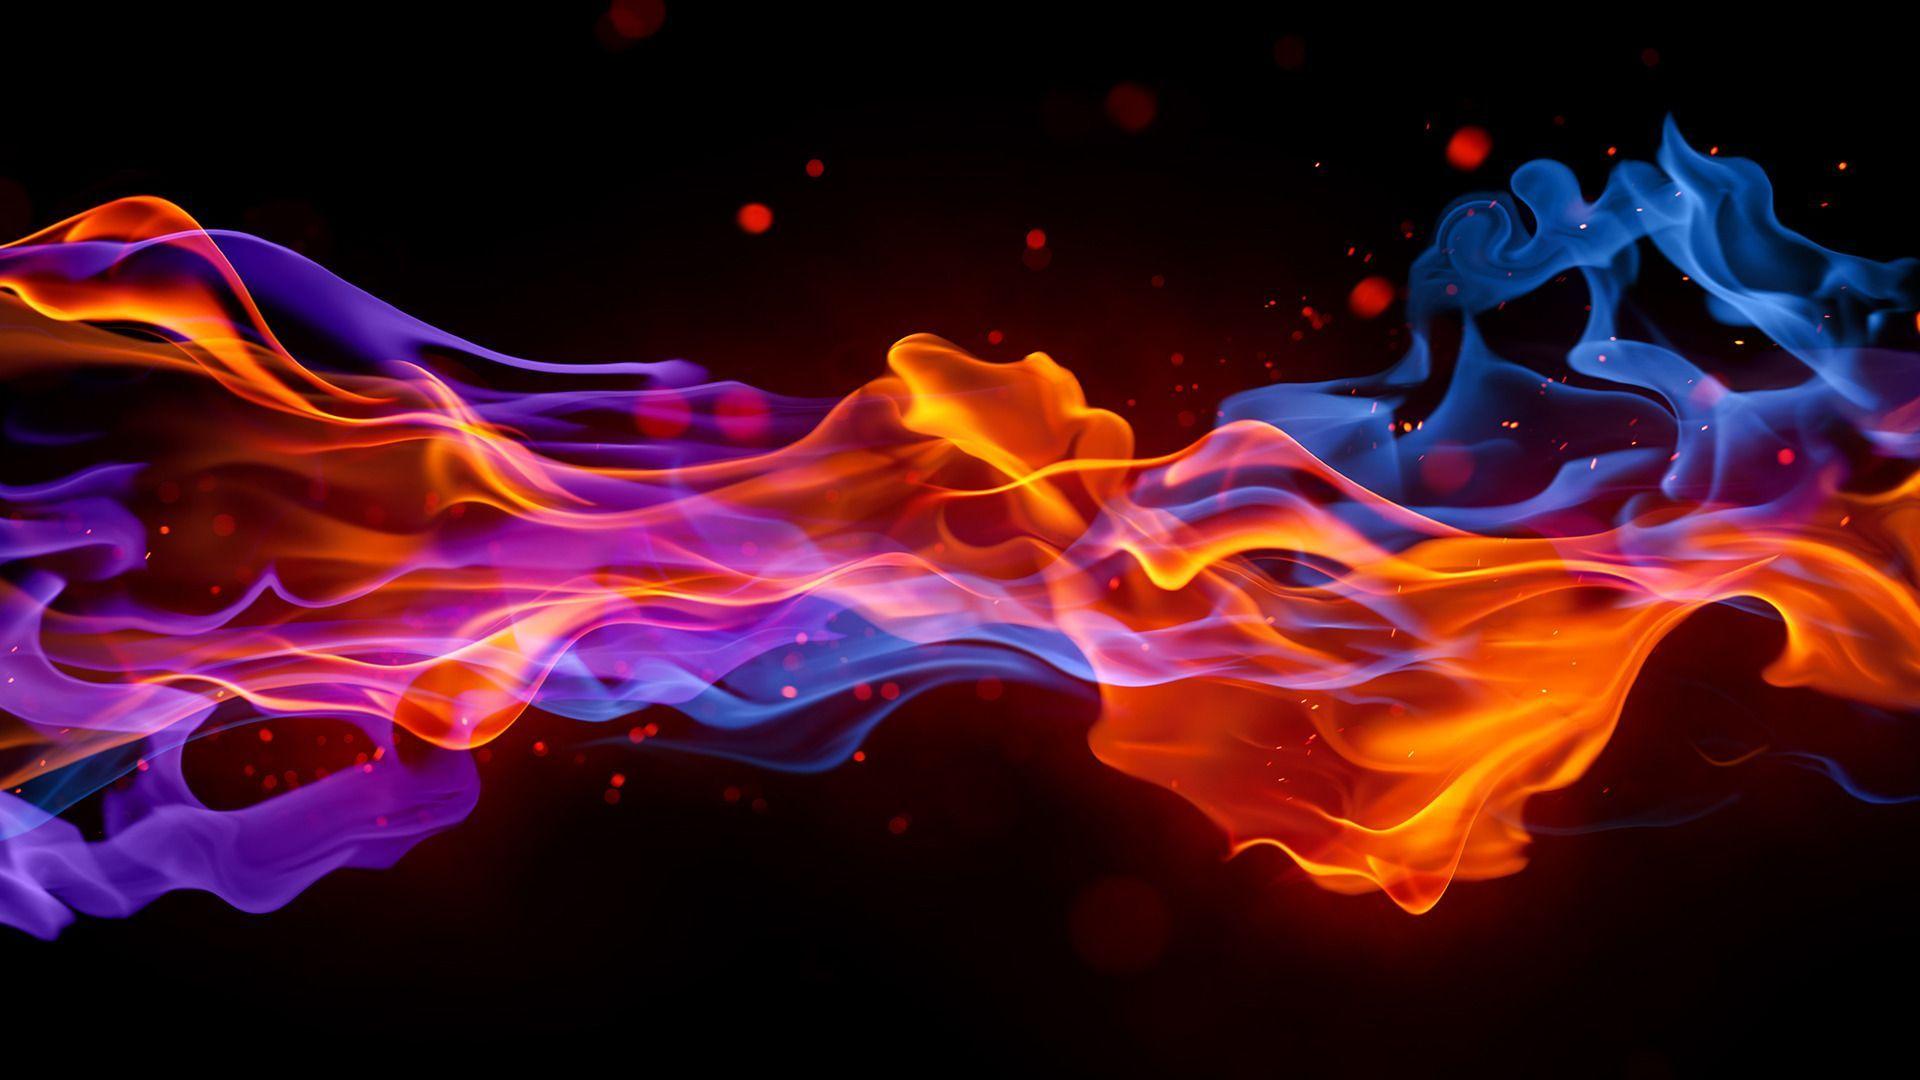 Fire Wallpaper, HDQ Fire Image Collection for Desktop, VV.85